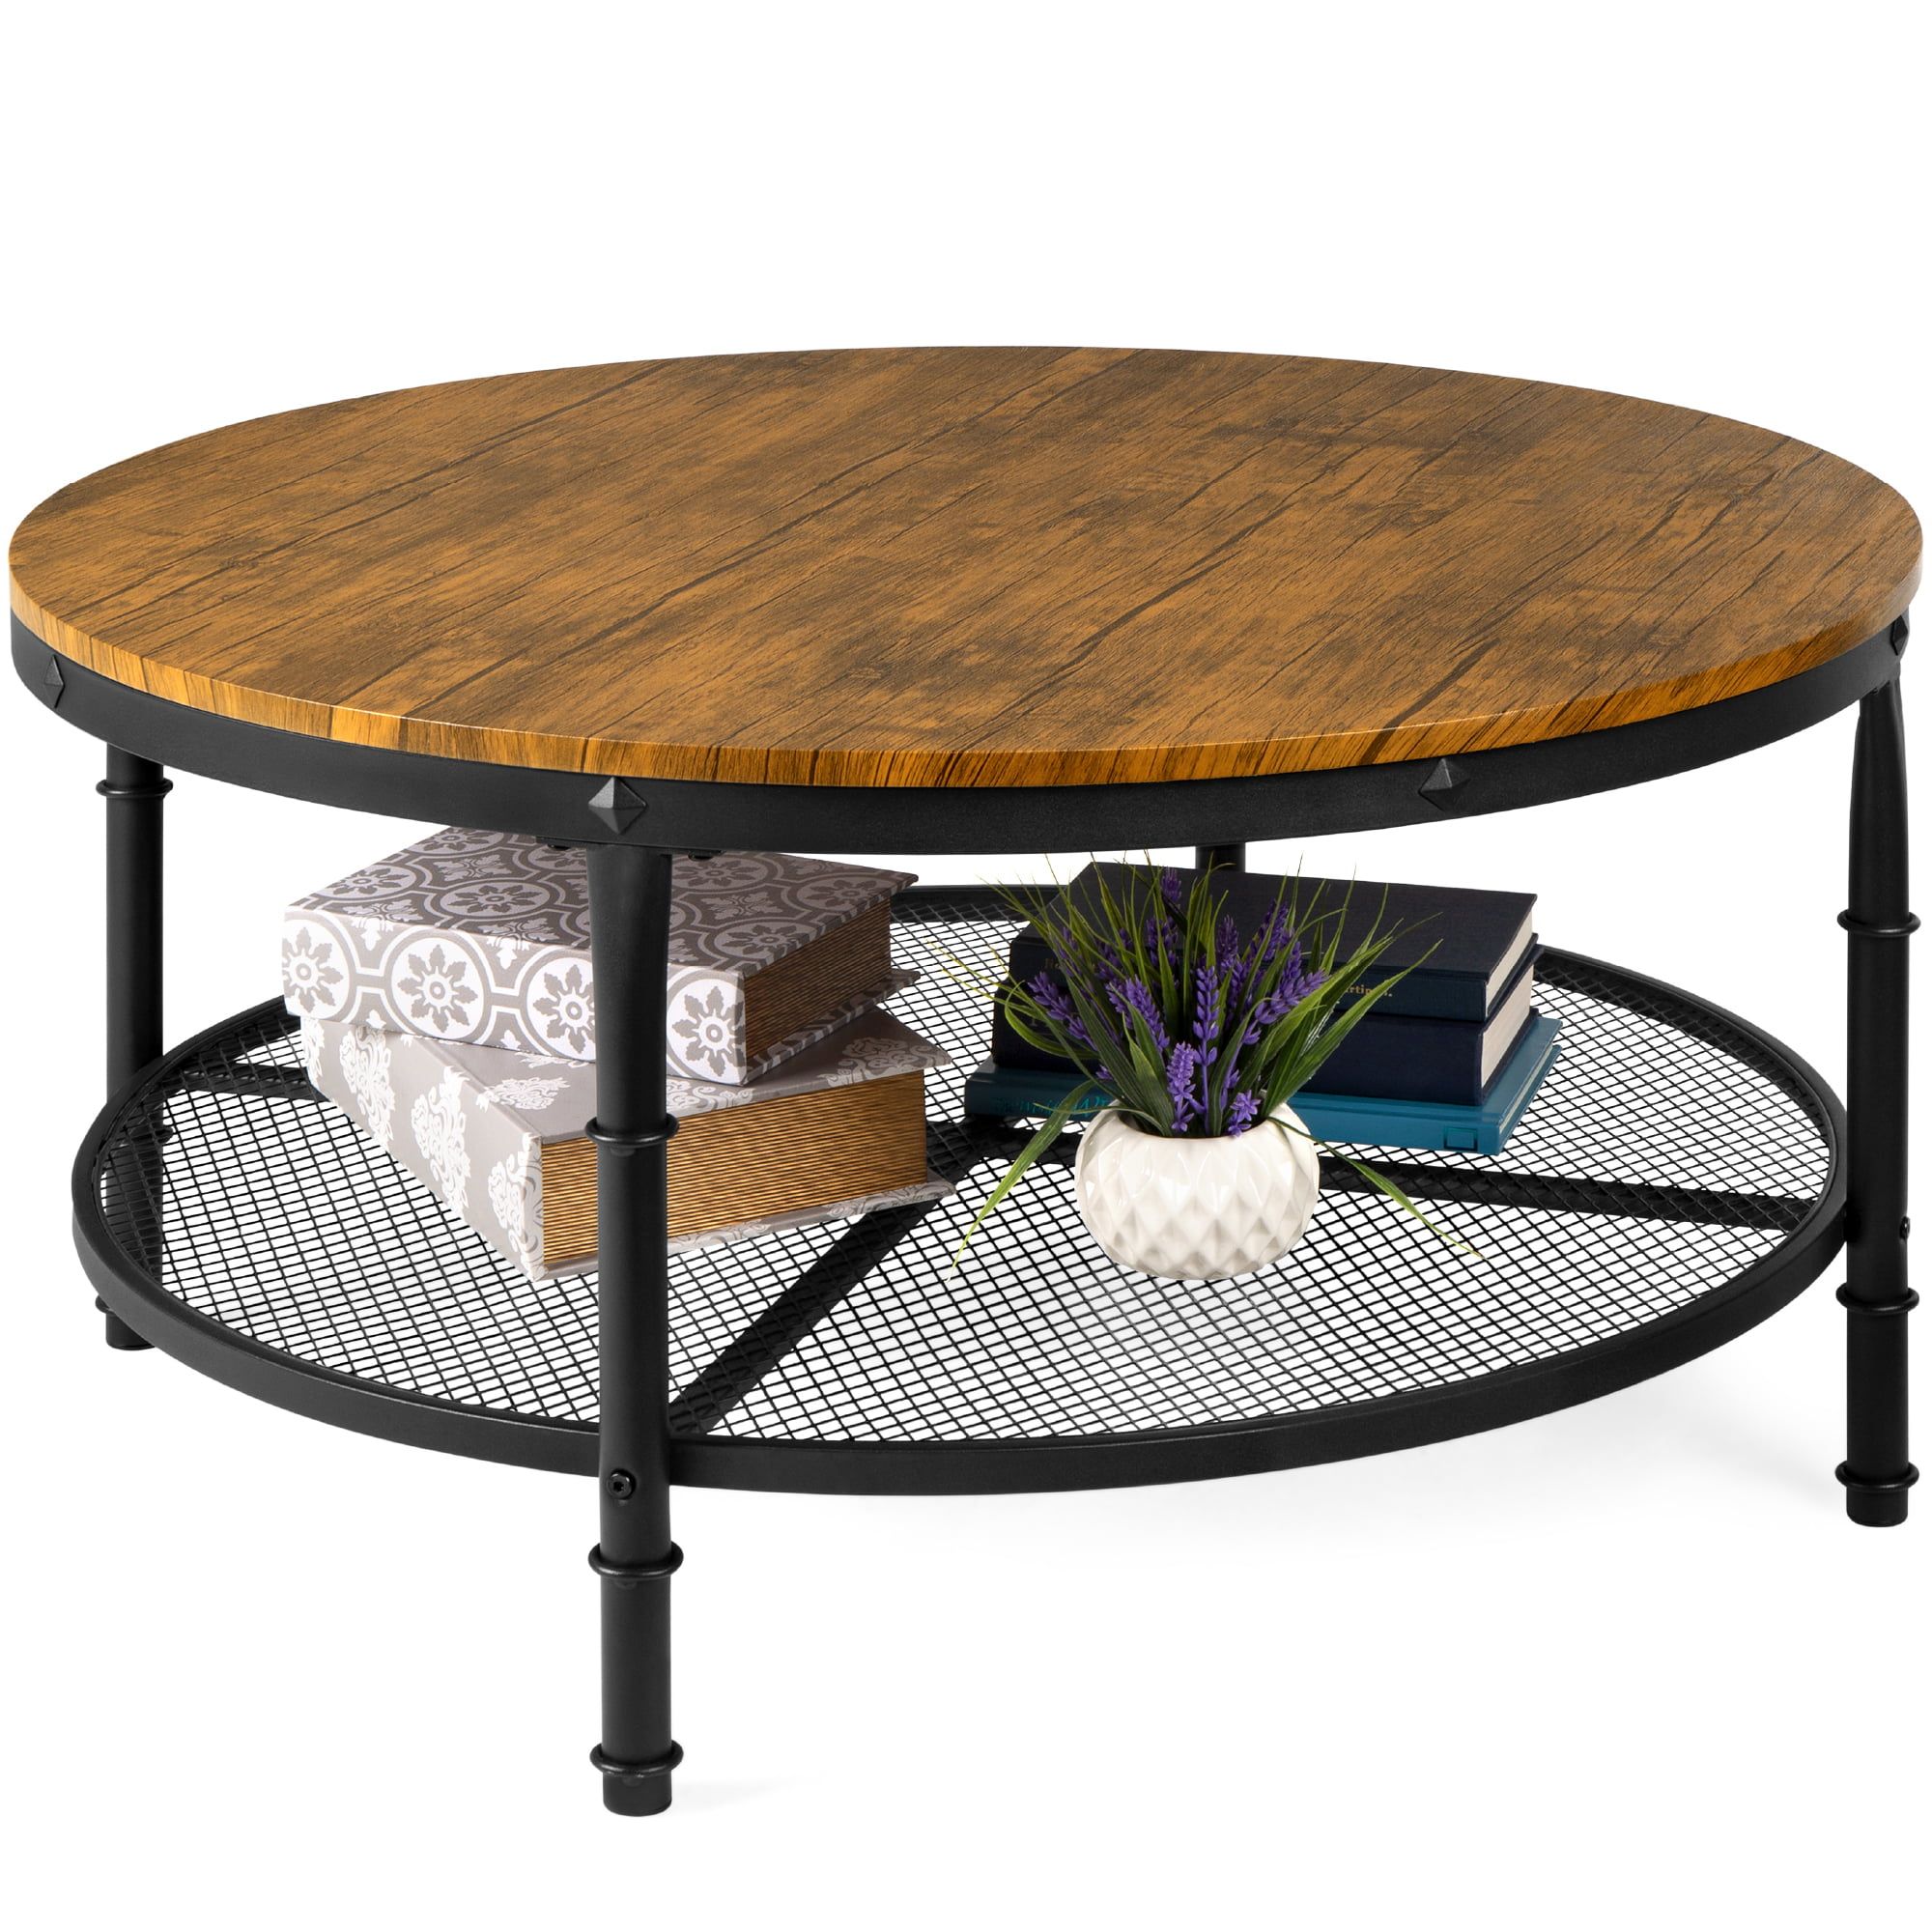 Best Choice Products 2 Tier Round Coffee Table, Rustic Steel Accent Inside Wood Coffee Tables With 2 Tier Storage (Gallery 15 of 20)